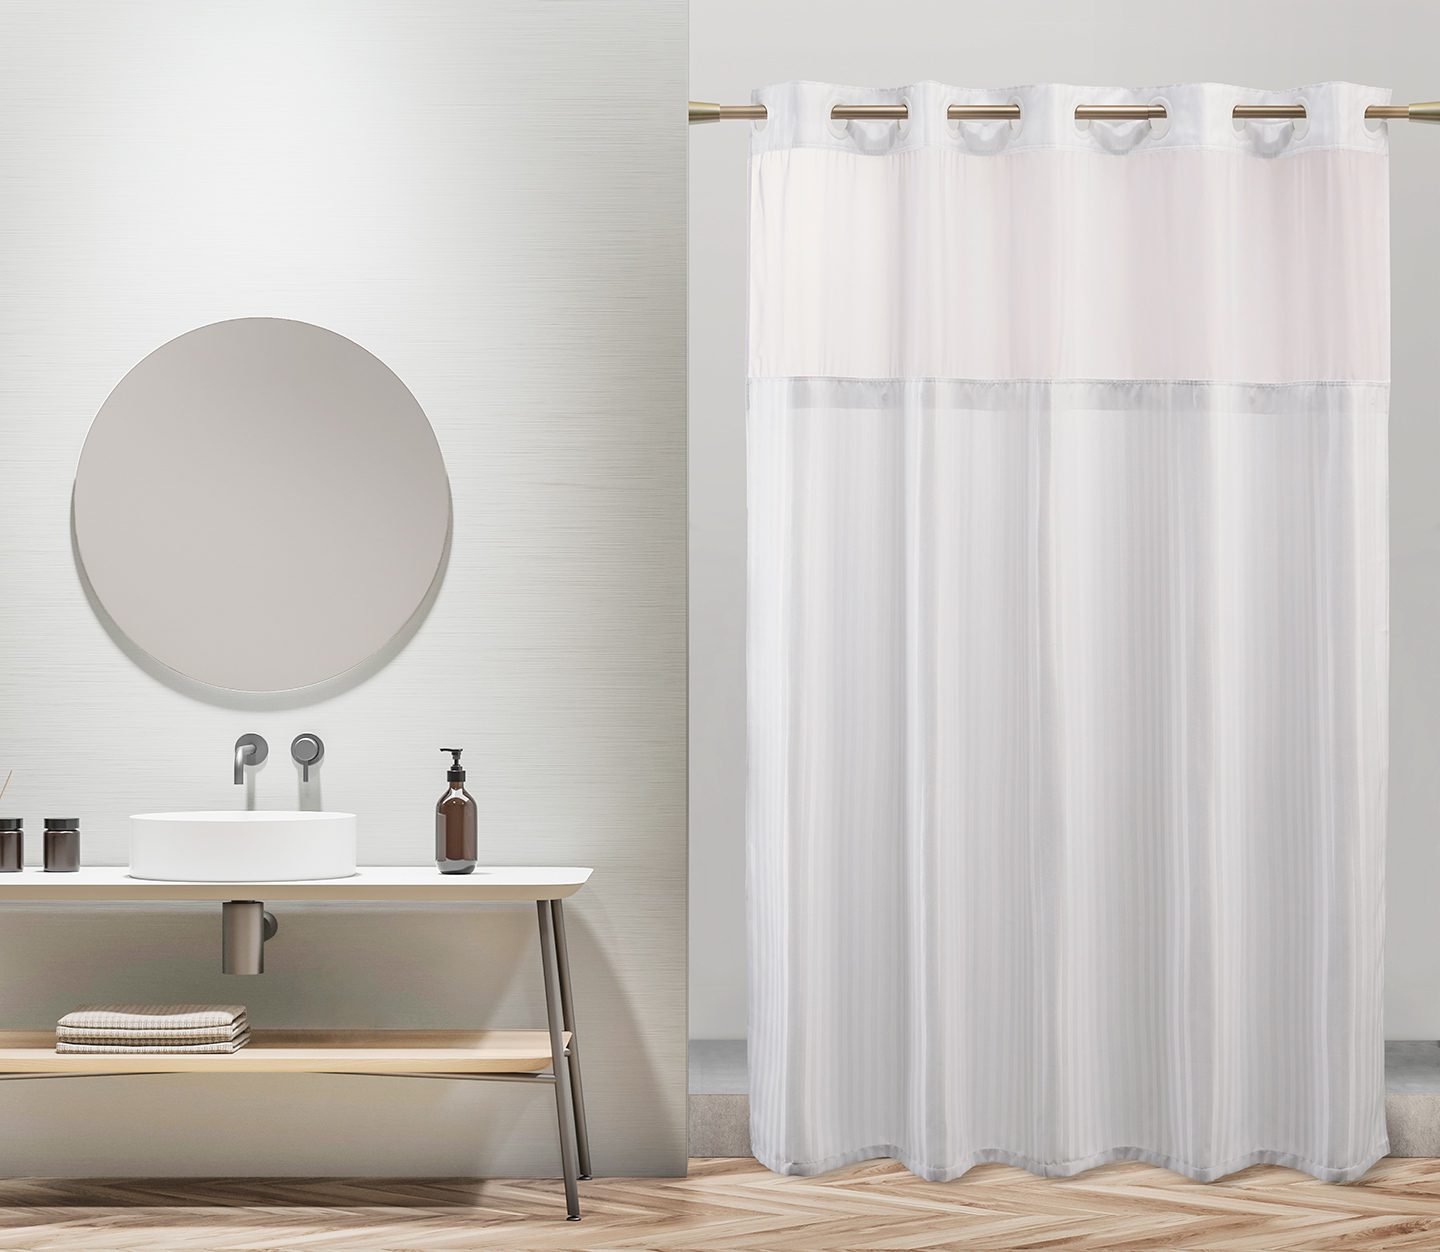 Hook-Free Shower Curtains